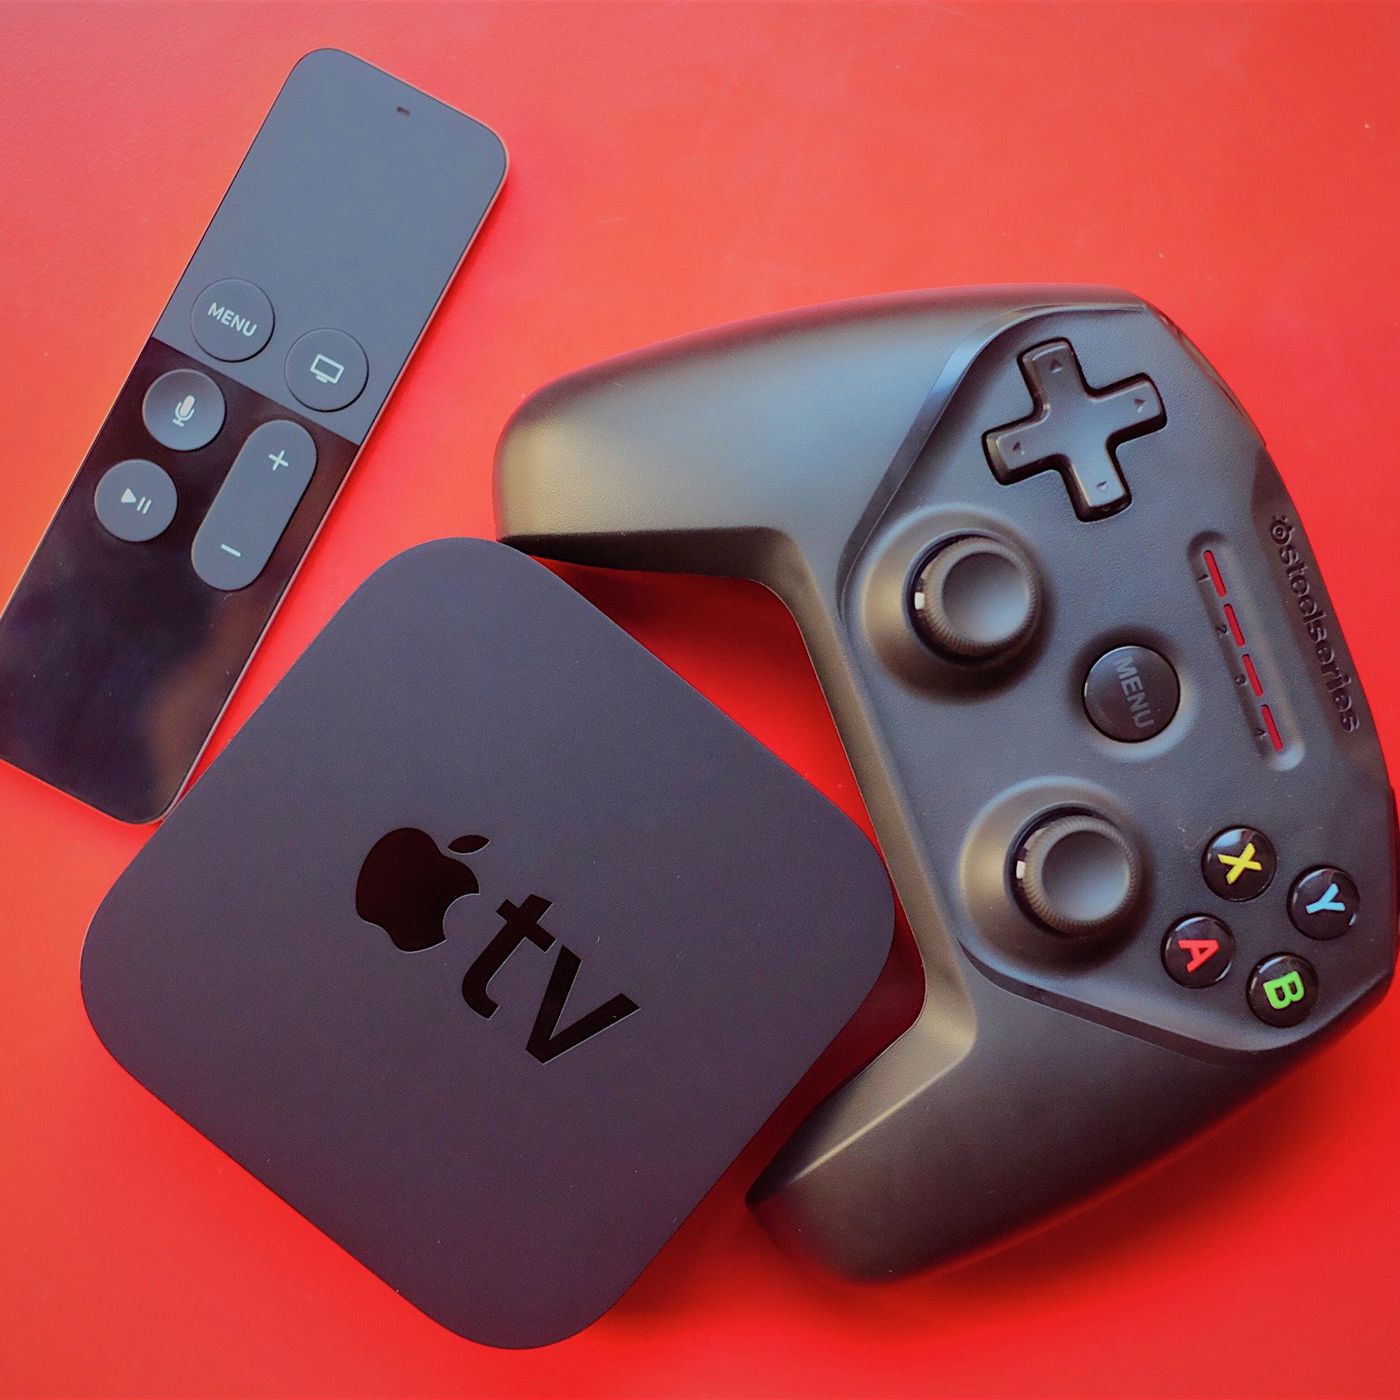 TV games will longer be crippled the Siri Remote - The Verge